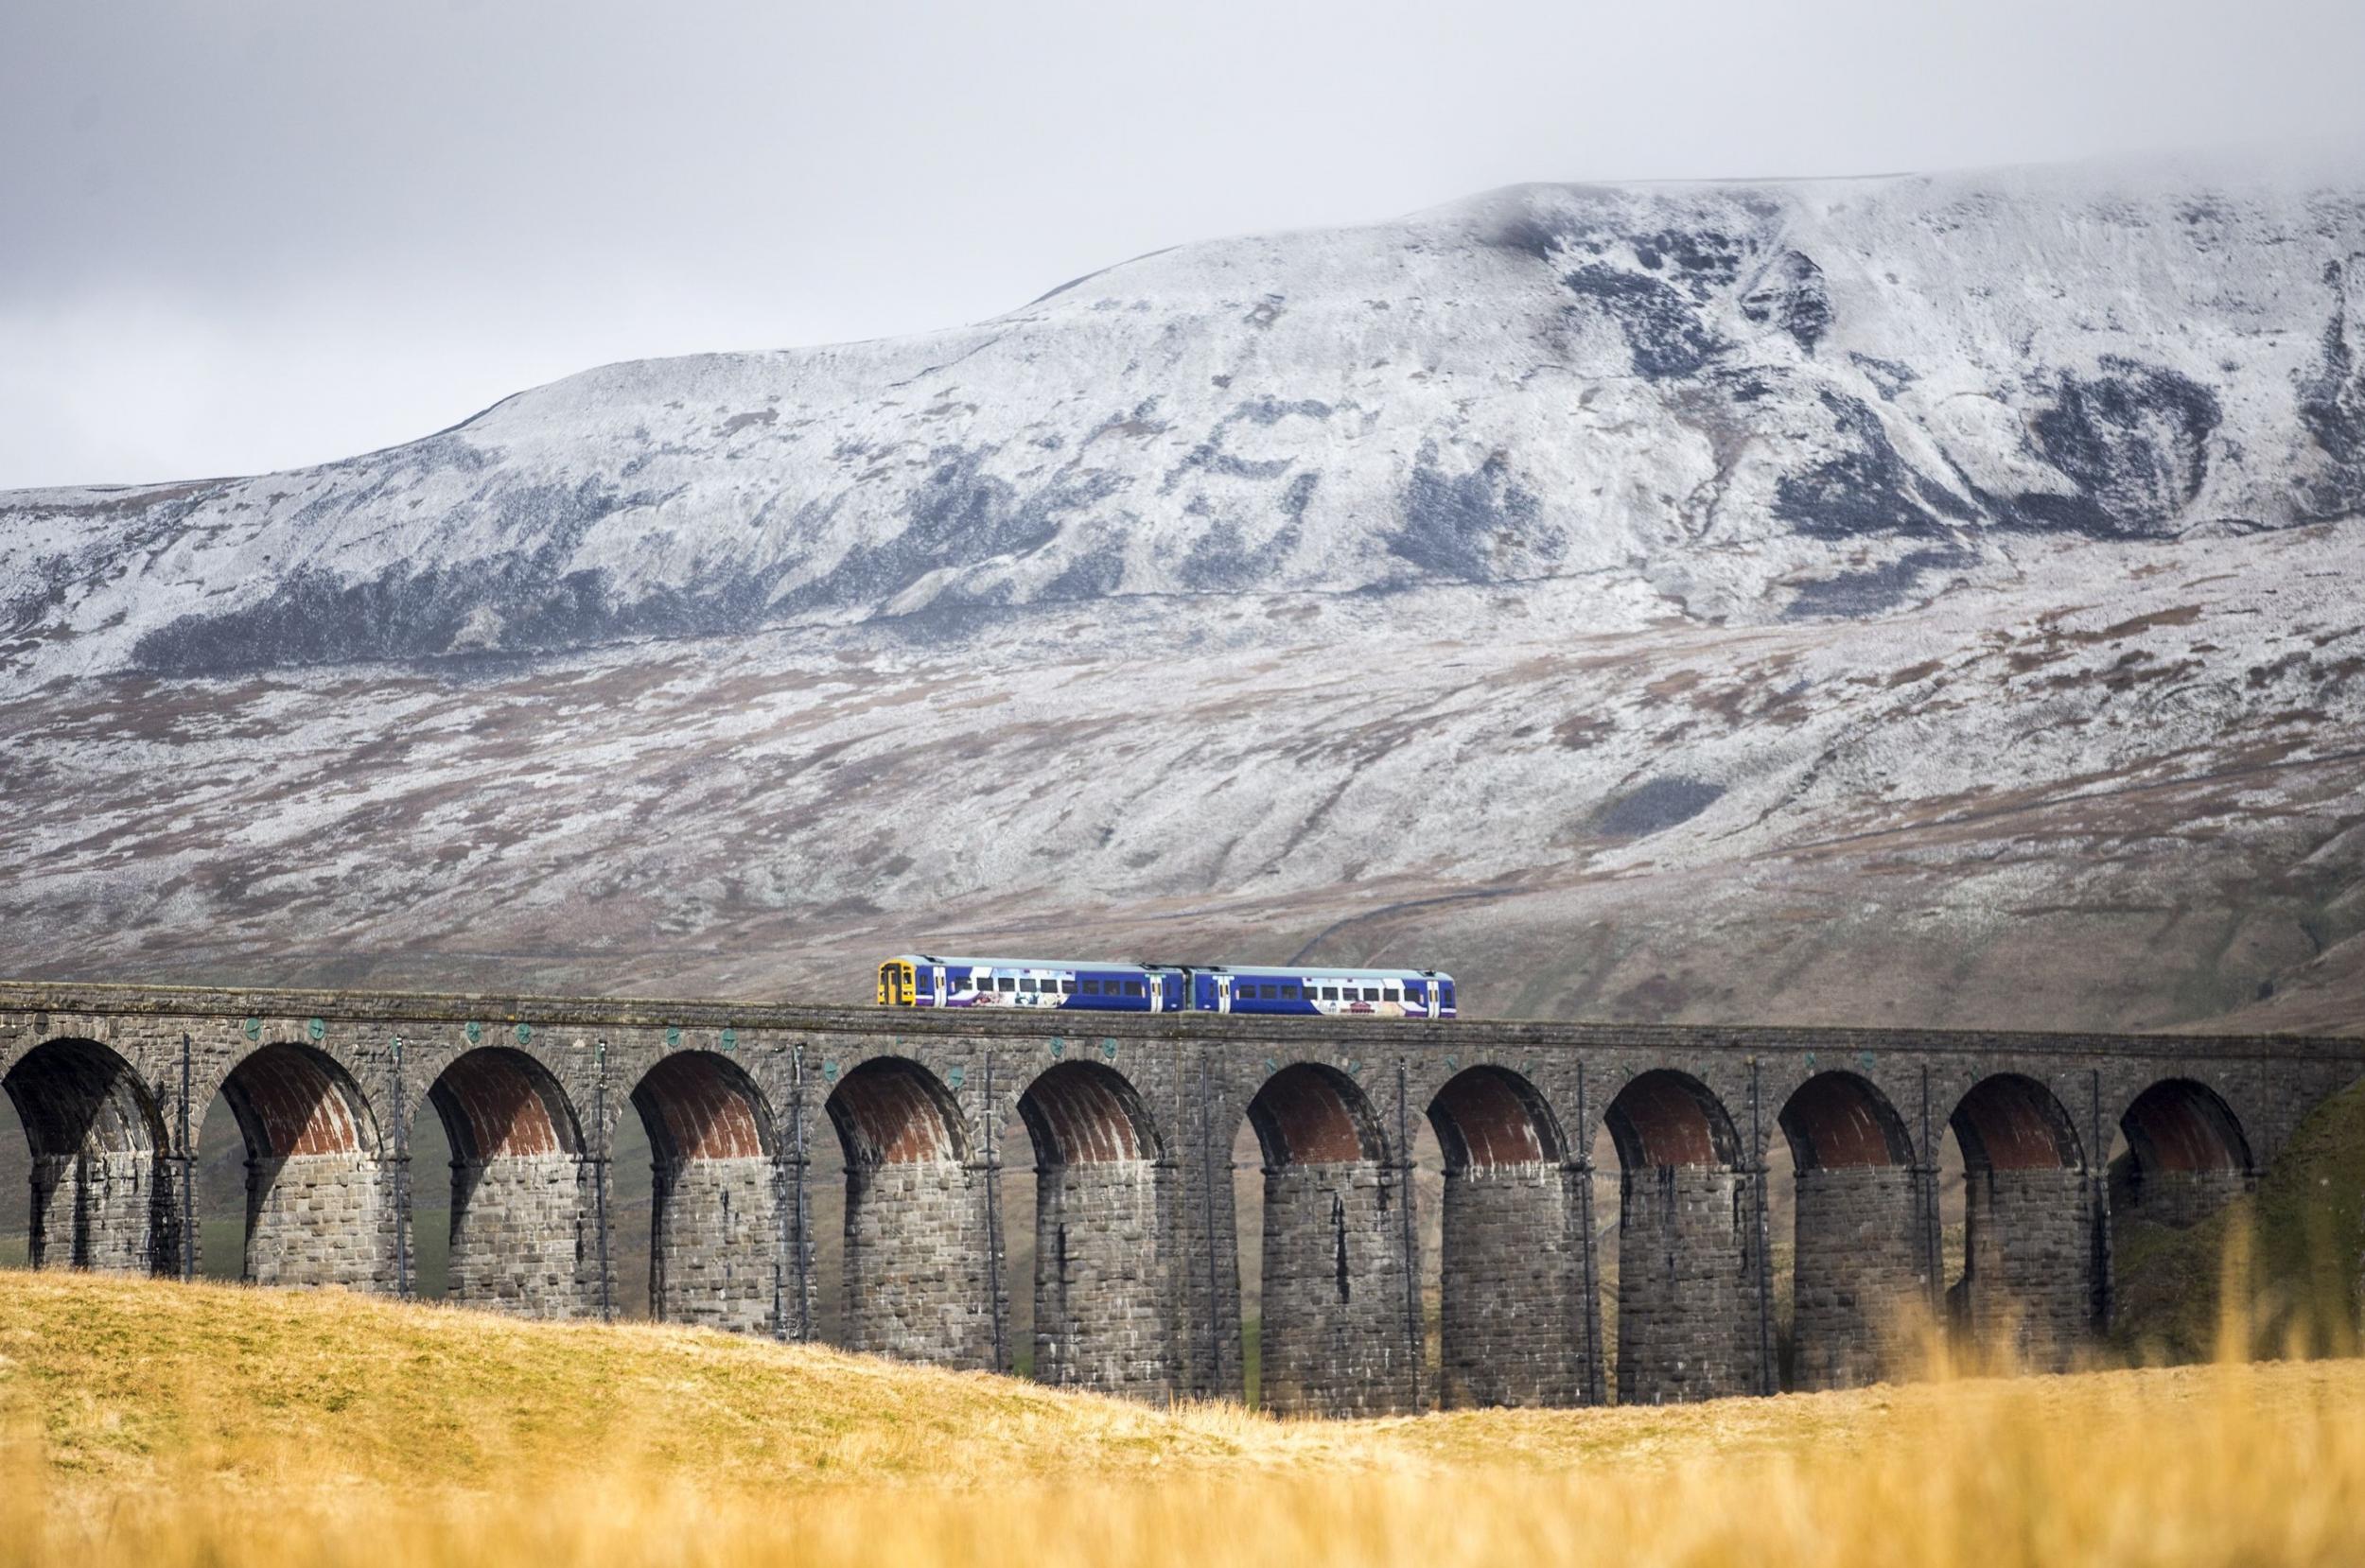 Ribblehead Viaduct is a great example of Victorian engineering